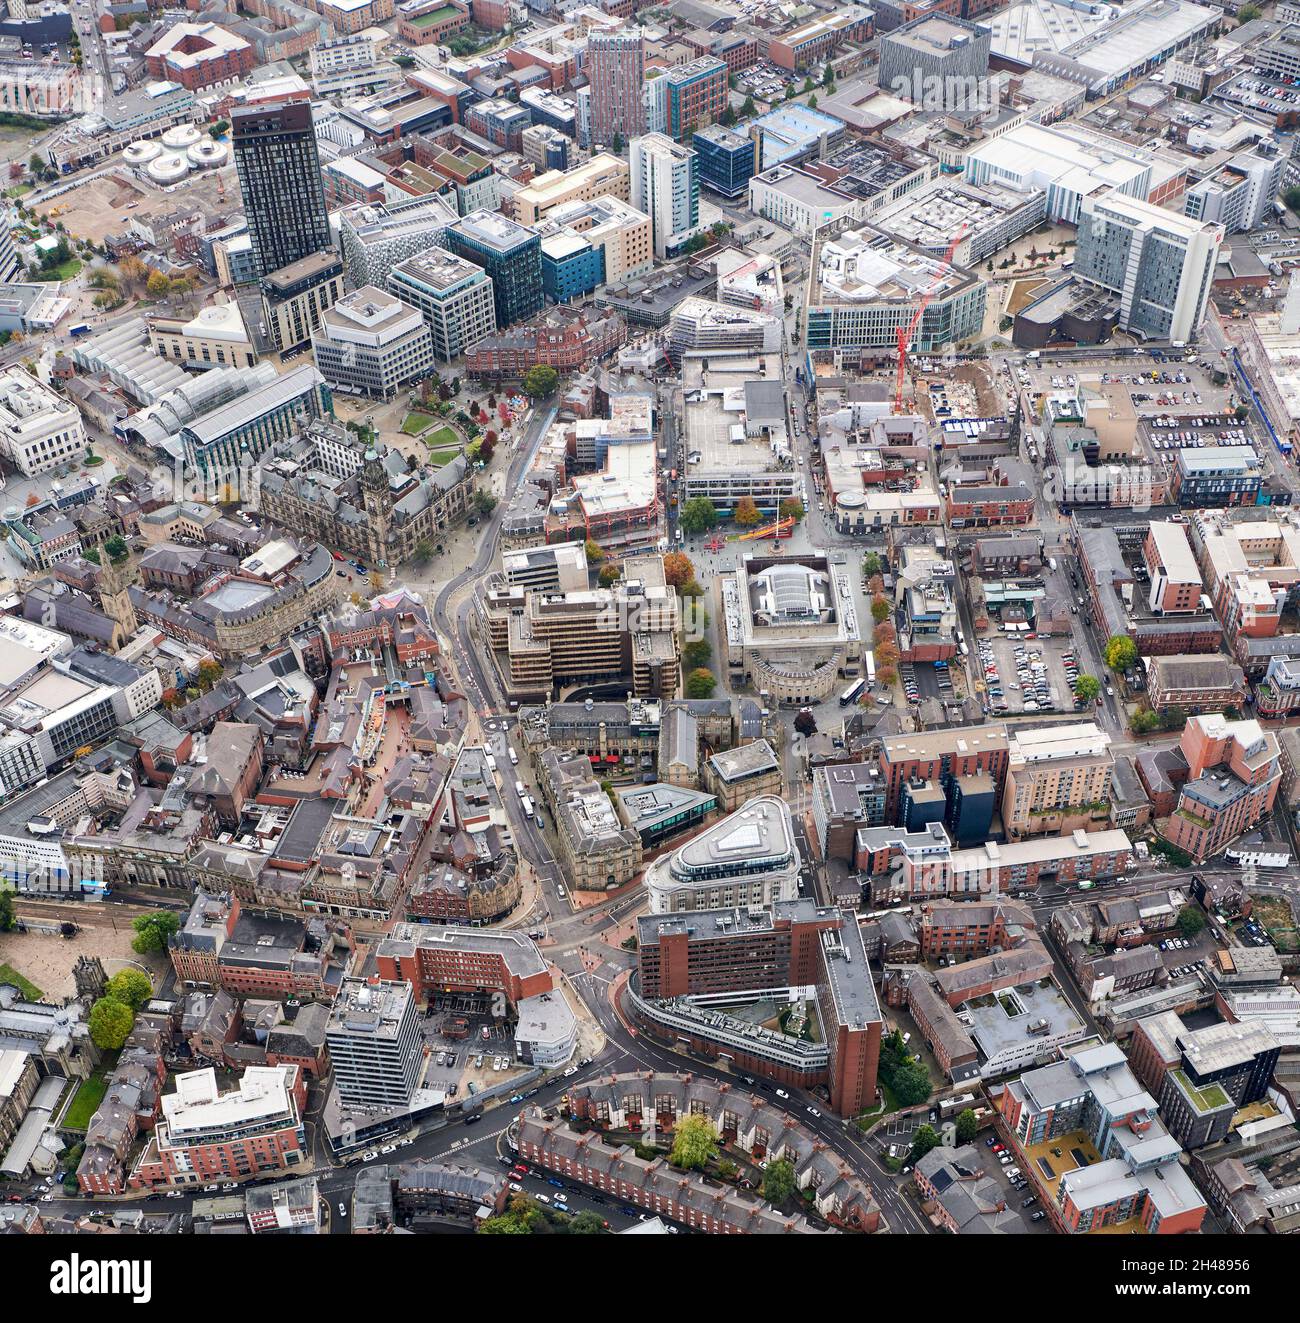 An aerial view of Sheffield City Centre, business and legal area, South Yorkshire, Northern England, UK Stock Photo